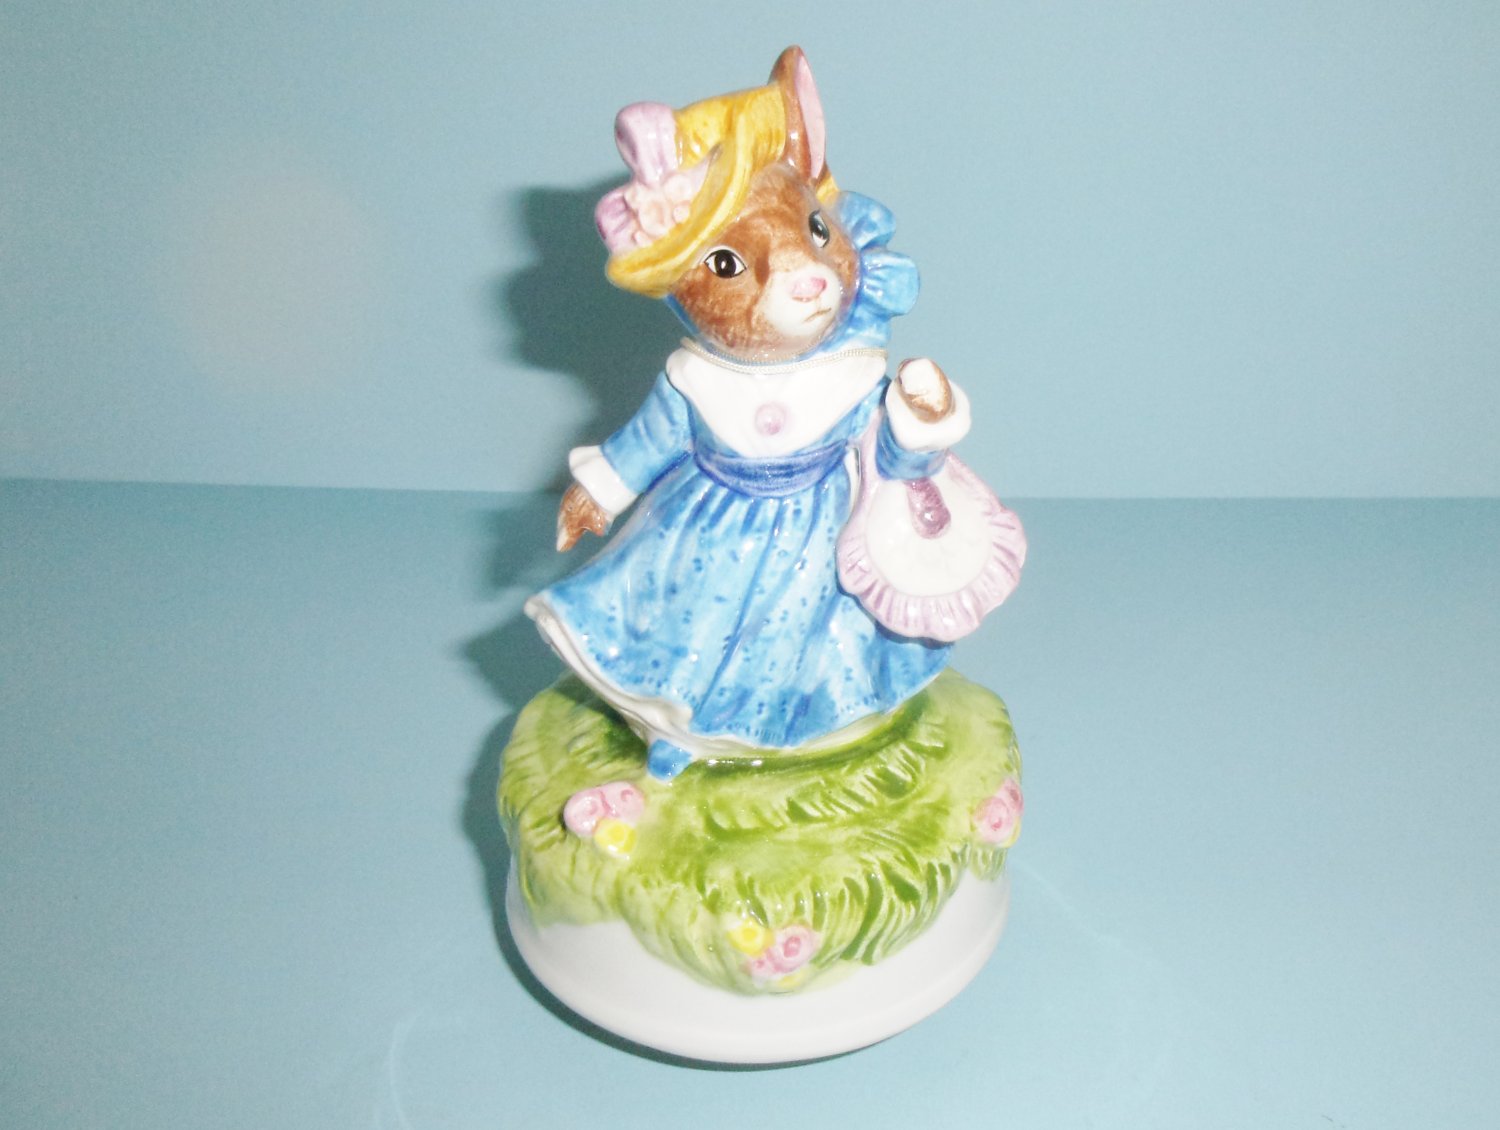 Schmid Rabbit Music Box Musical Bunny Rabbit Plays You Don't Bring Me Flowers No. 344 Made in Japan